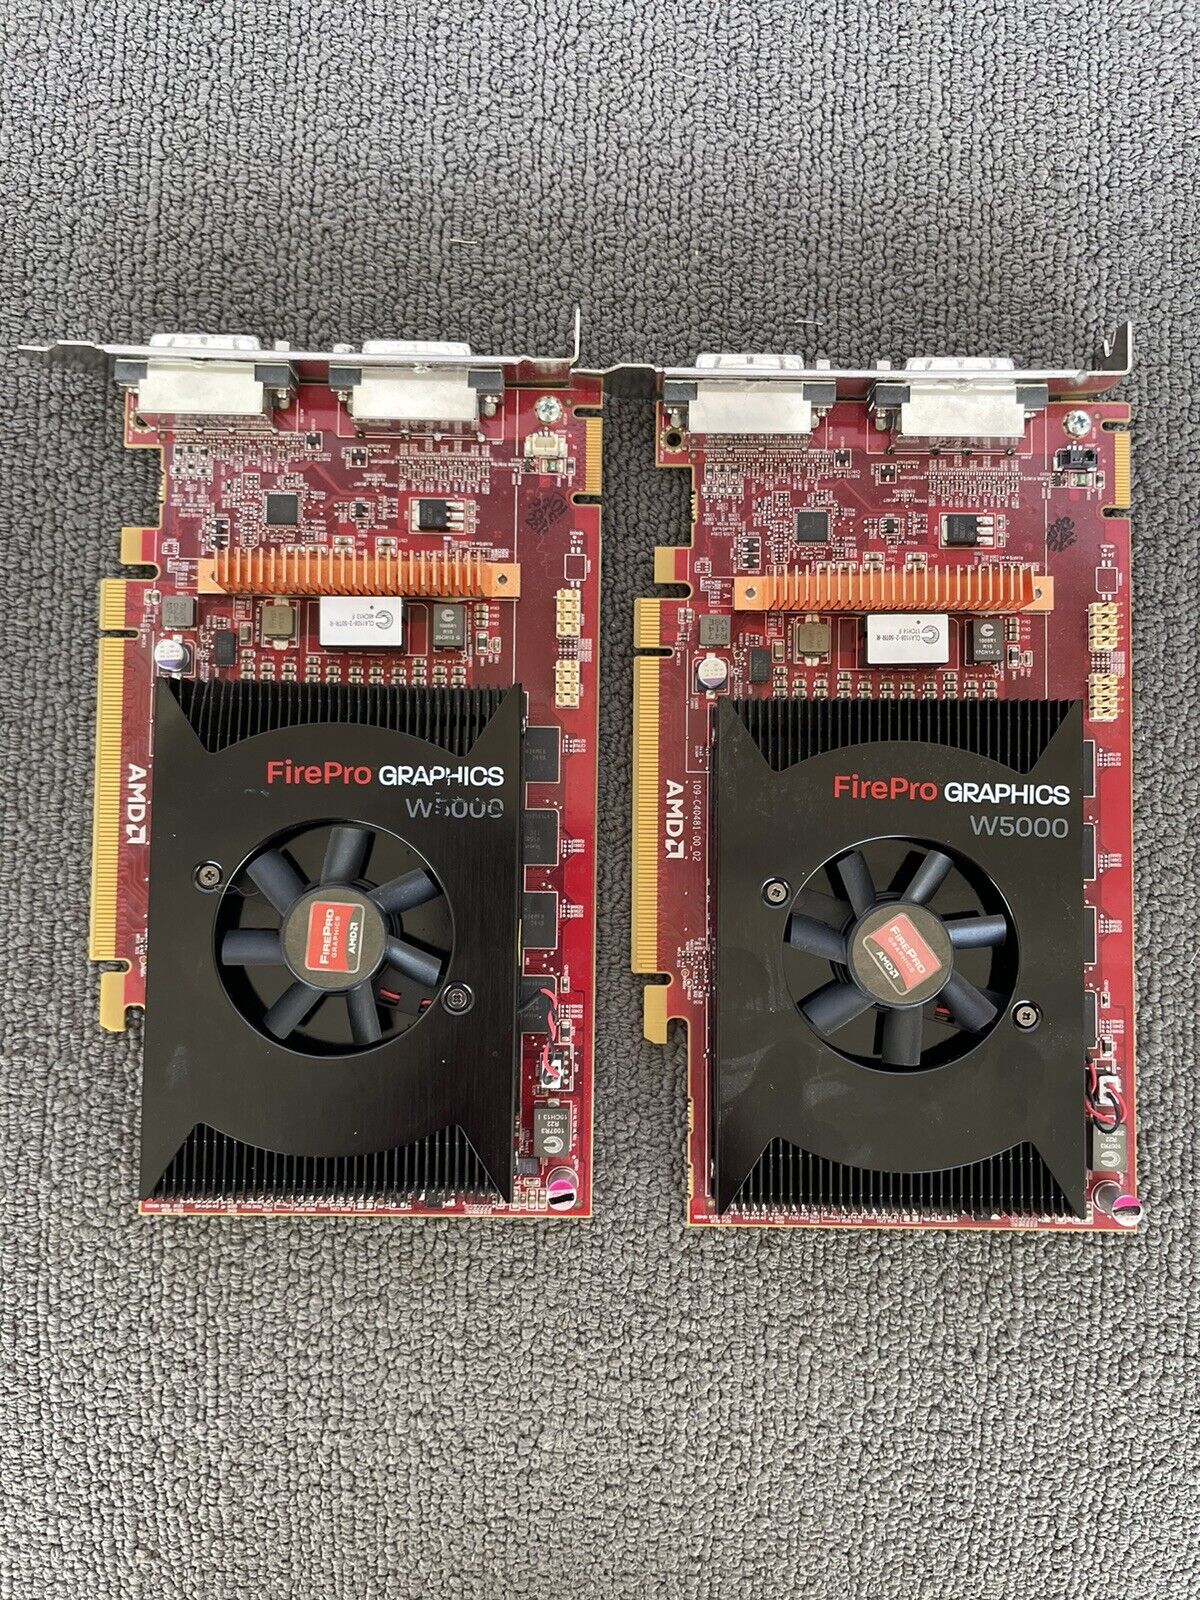 AMD FIRE PRO W5000 Graphics Card (Set Of 2) Used In Very Nice Working Condition